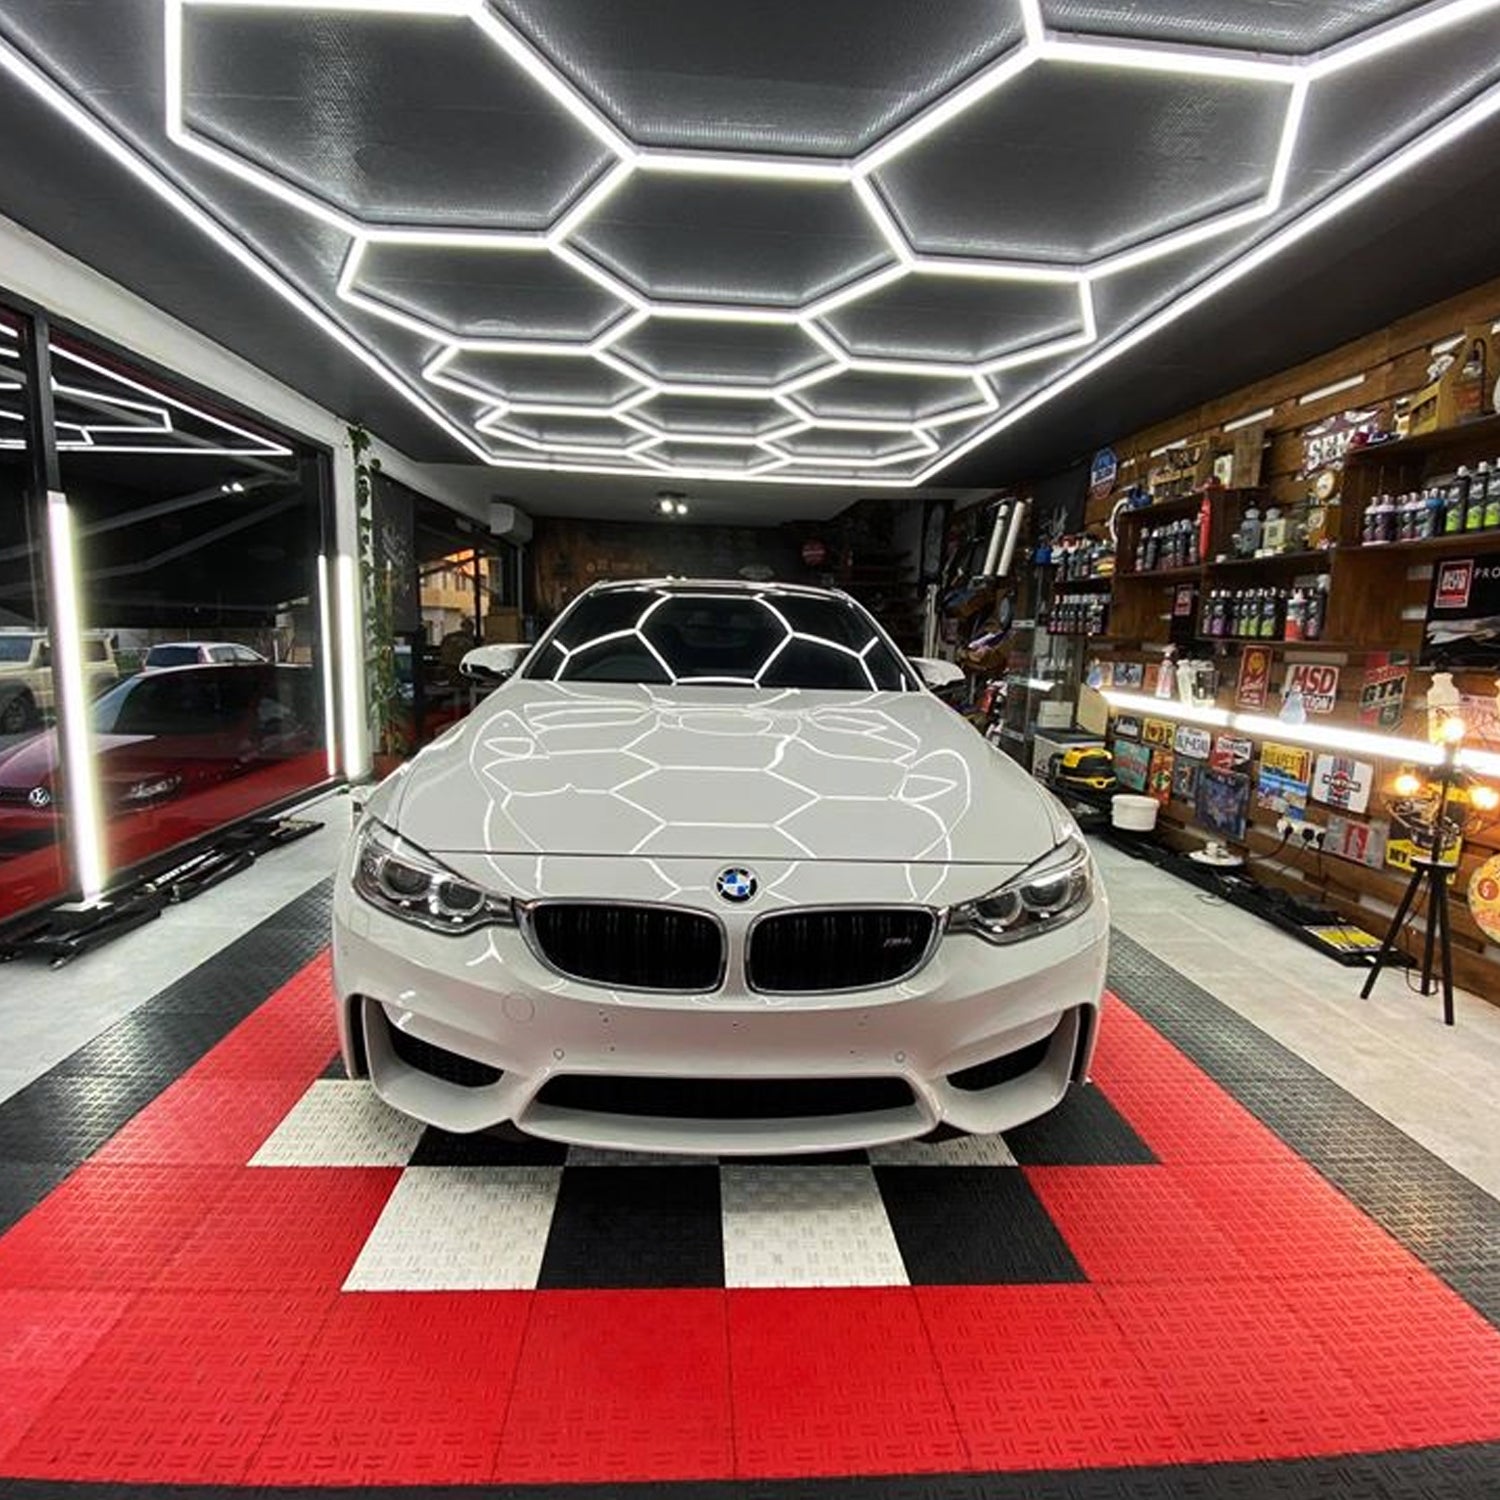 Garage transformed into a well-lit workspace by the Vortex Hexa Light ST1028's efficient LEDs.